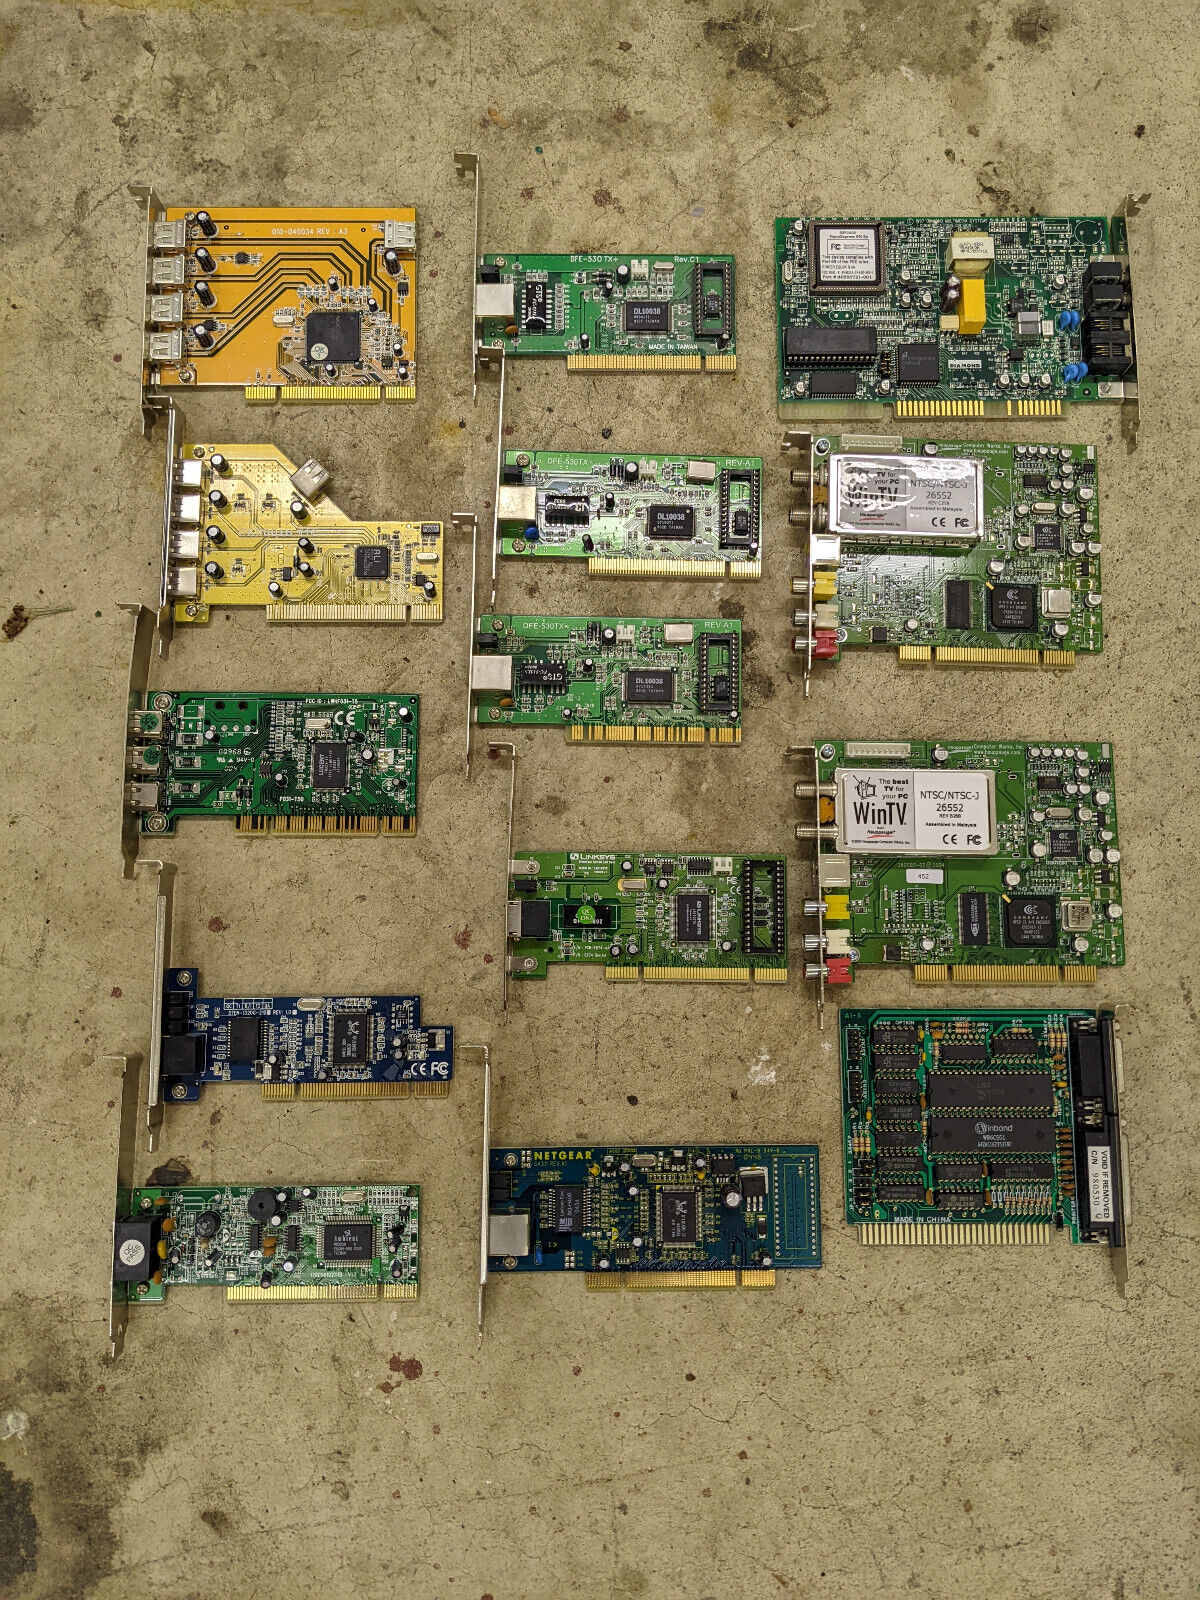 Lot of 14 Old Vintage Computer PC Expansion Add On Interface Cards PCI ISA